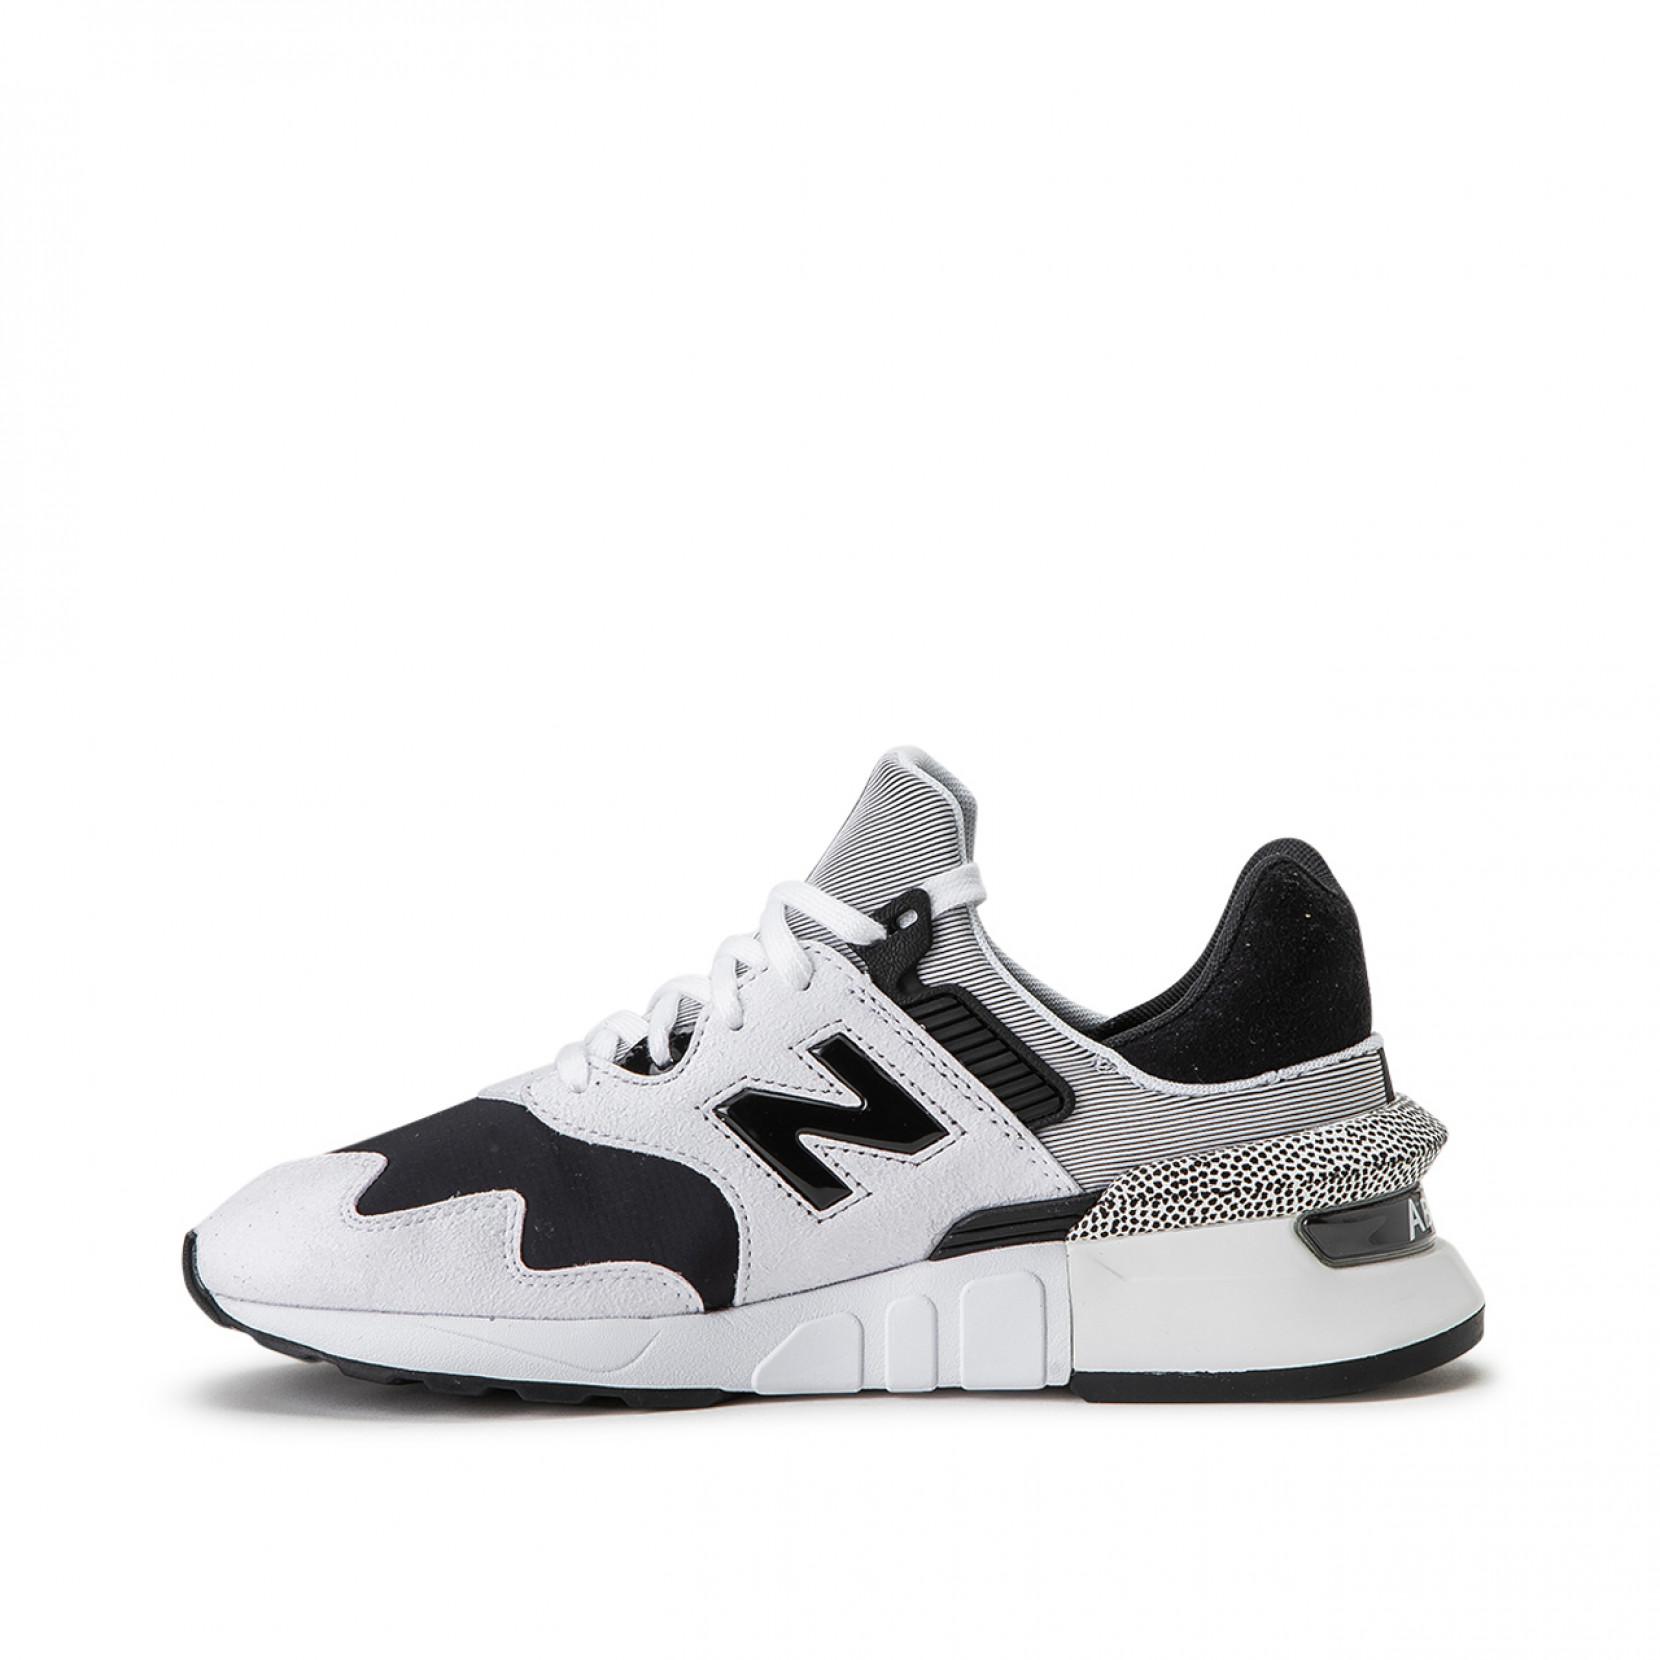 New Balance Suede Ws997 Jcf in White for Men - Lyst